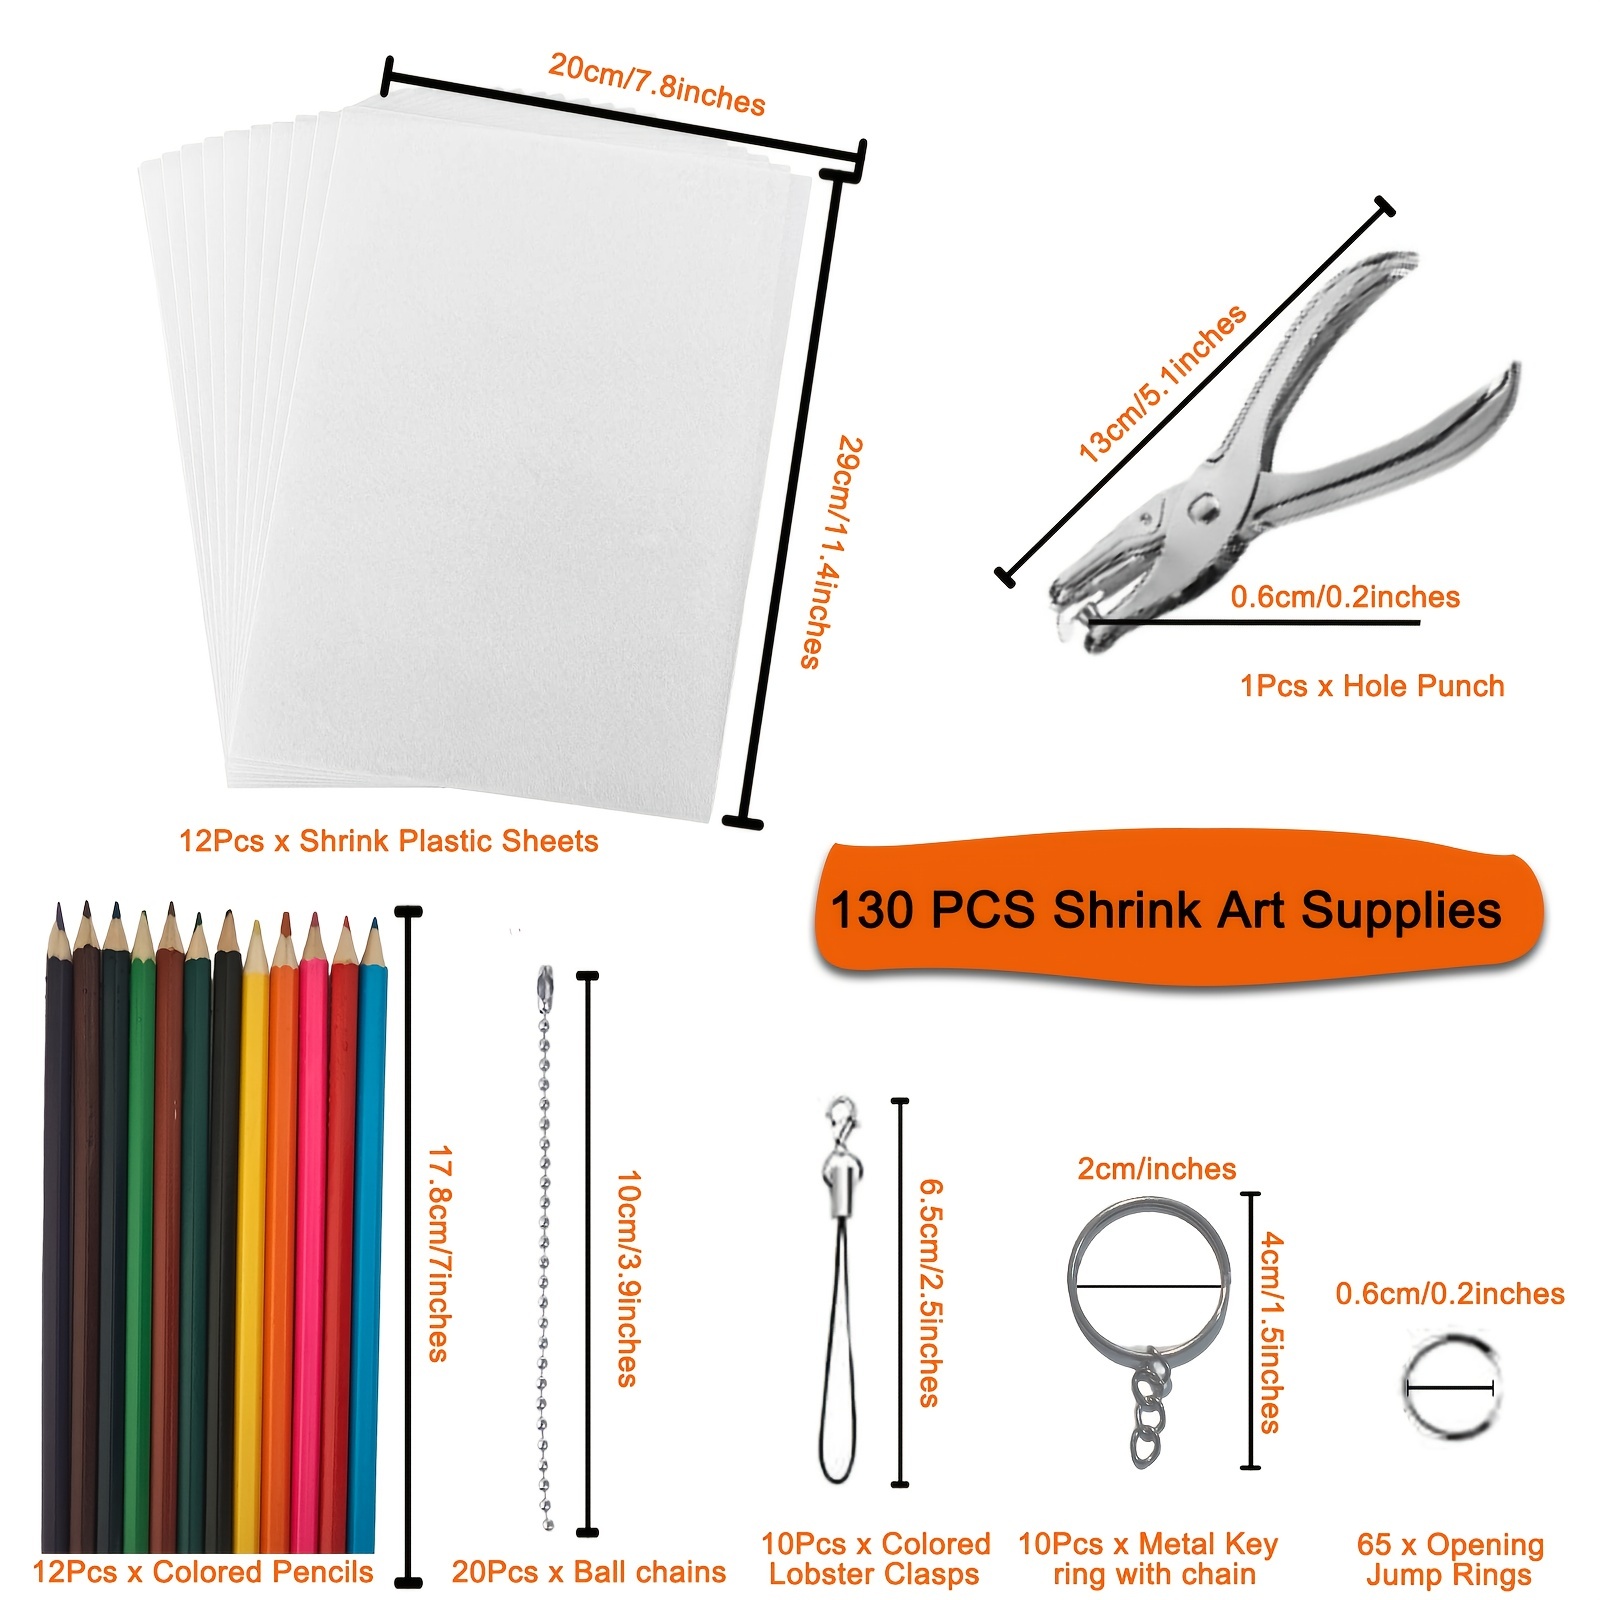 156 Pcs Heat Shrink Sheets Kits for Shrinky Dink, Including 13 Pcs Plastic Shrinky  Paper Film, 130 Pcs Pendant Jewelry Keychains, Hole Punch, 12 Pcs Colored  Pencils, for Kids Holiday Gift DIY Craft 